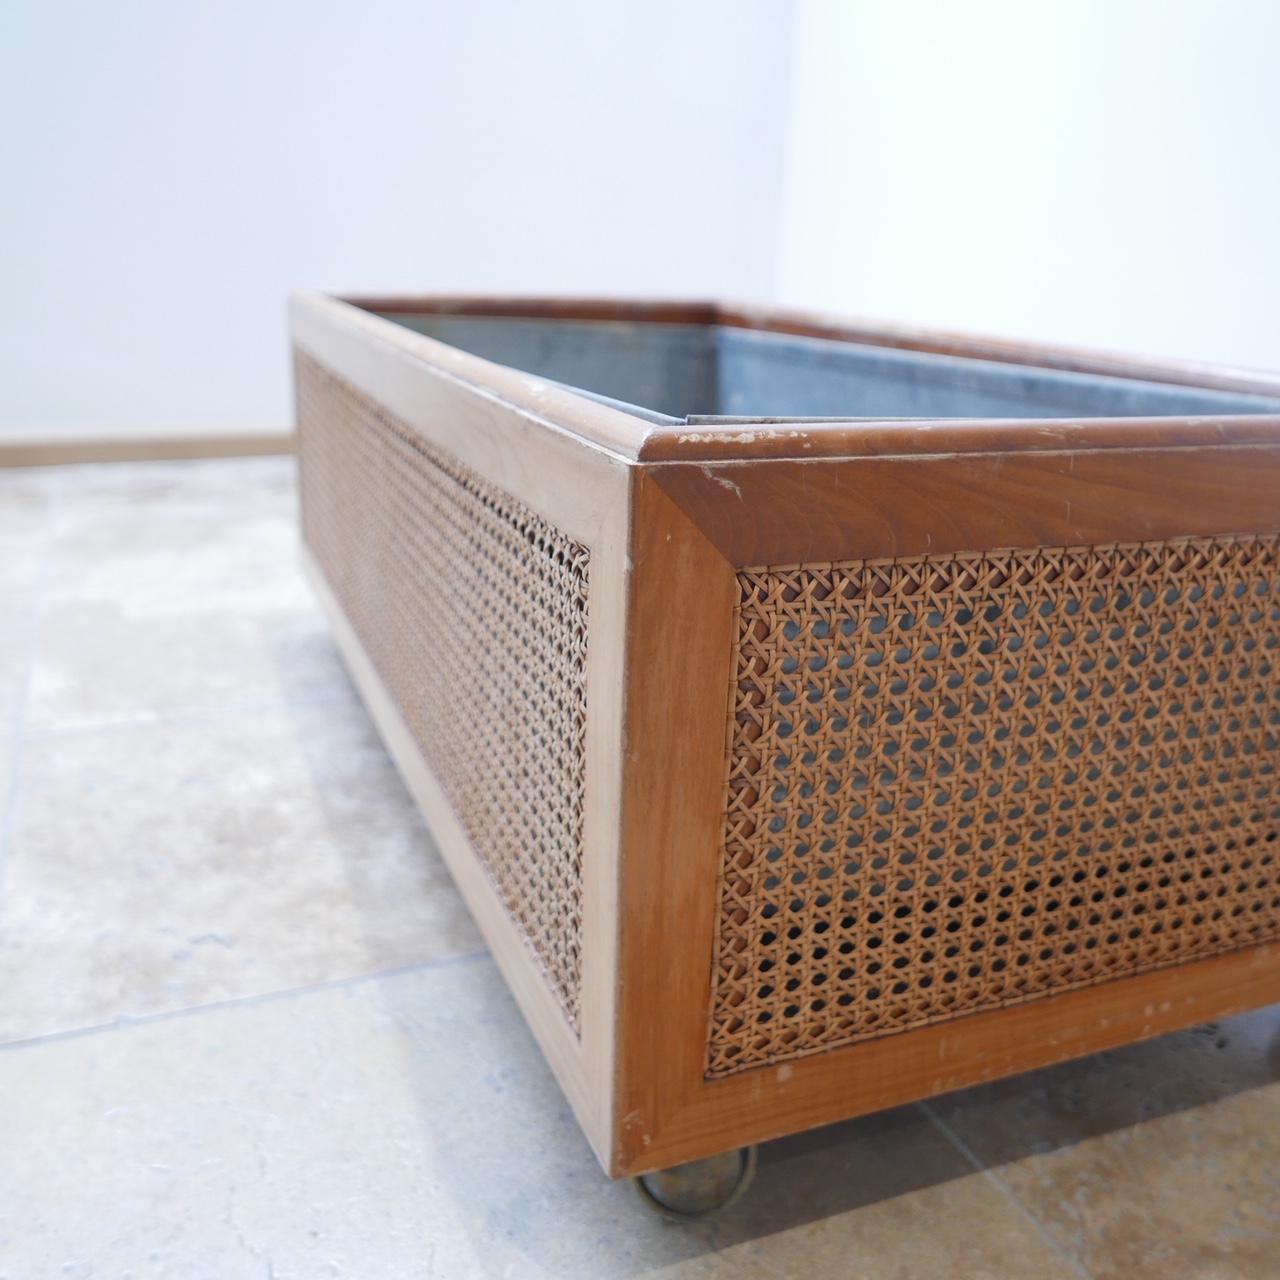 French, midcentury rattan planter. 

Ideal for home or office environment. 

Rattan side, wooden carcass, raised on metal wheels. 

Condition is generally good but there are scuffs to the wood. The internal metal soil container is solid and